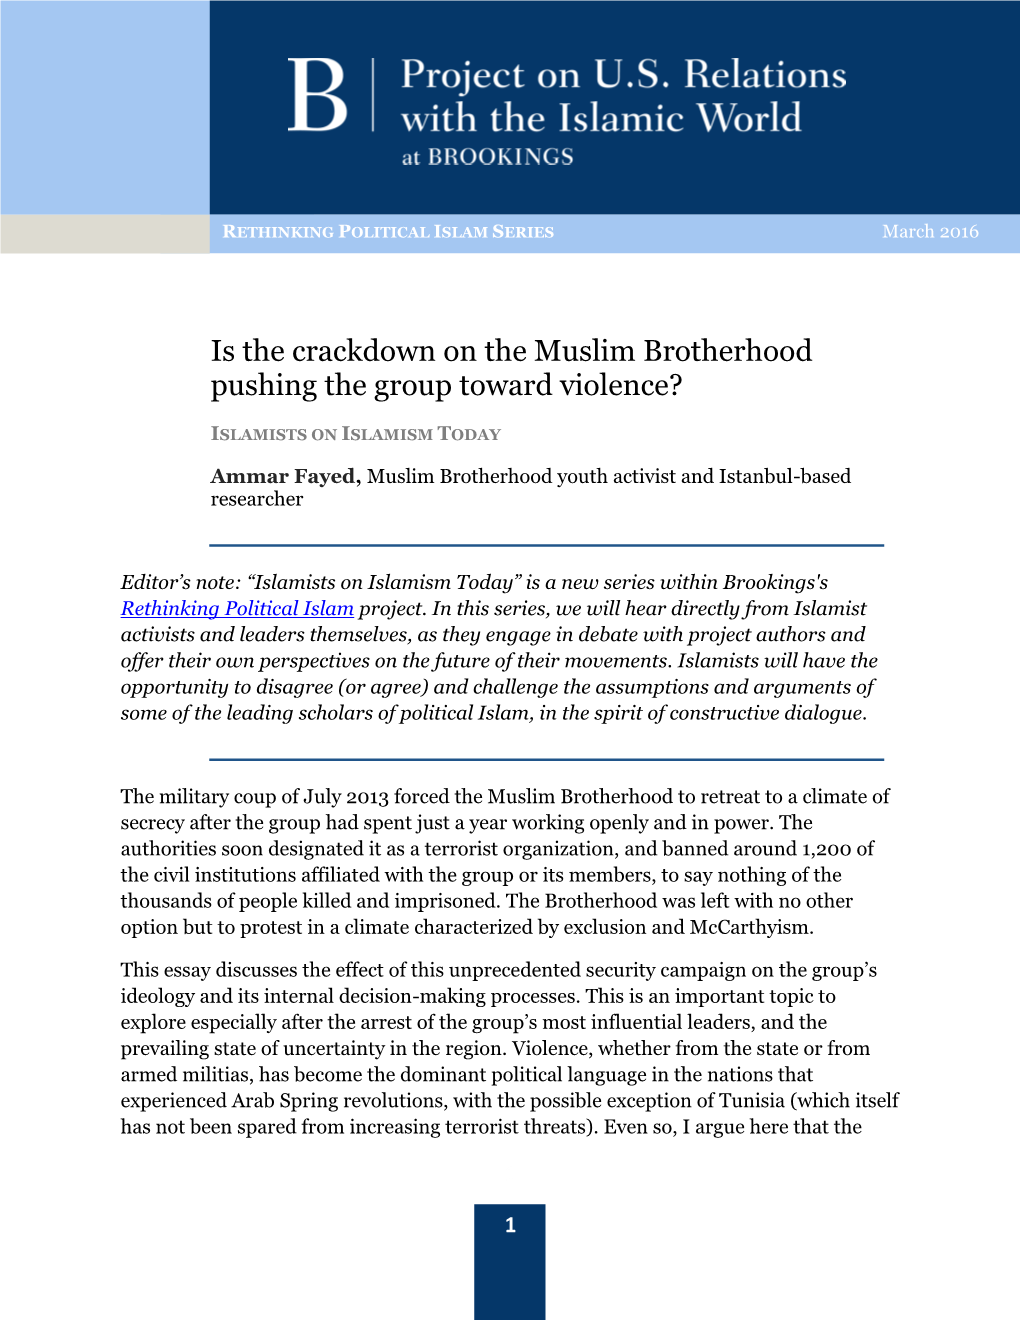 Is the Crackdown on the Muslim Brotherhood Pushing the Group Toward Violence?